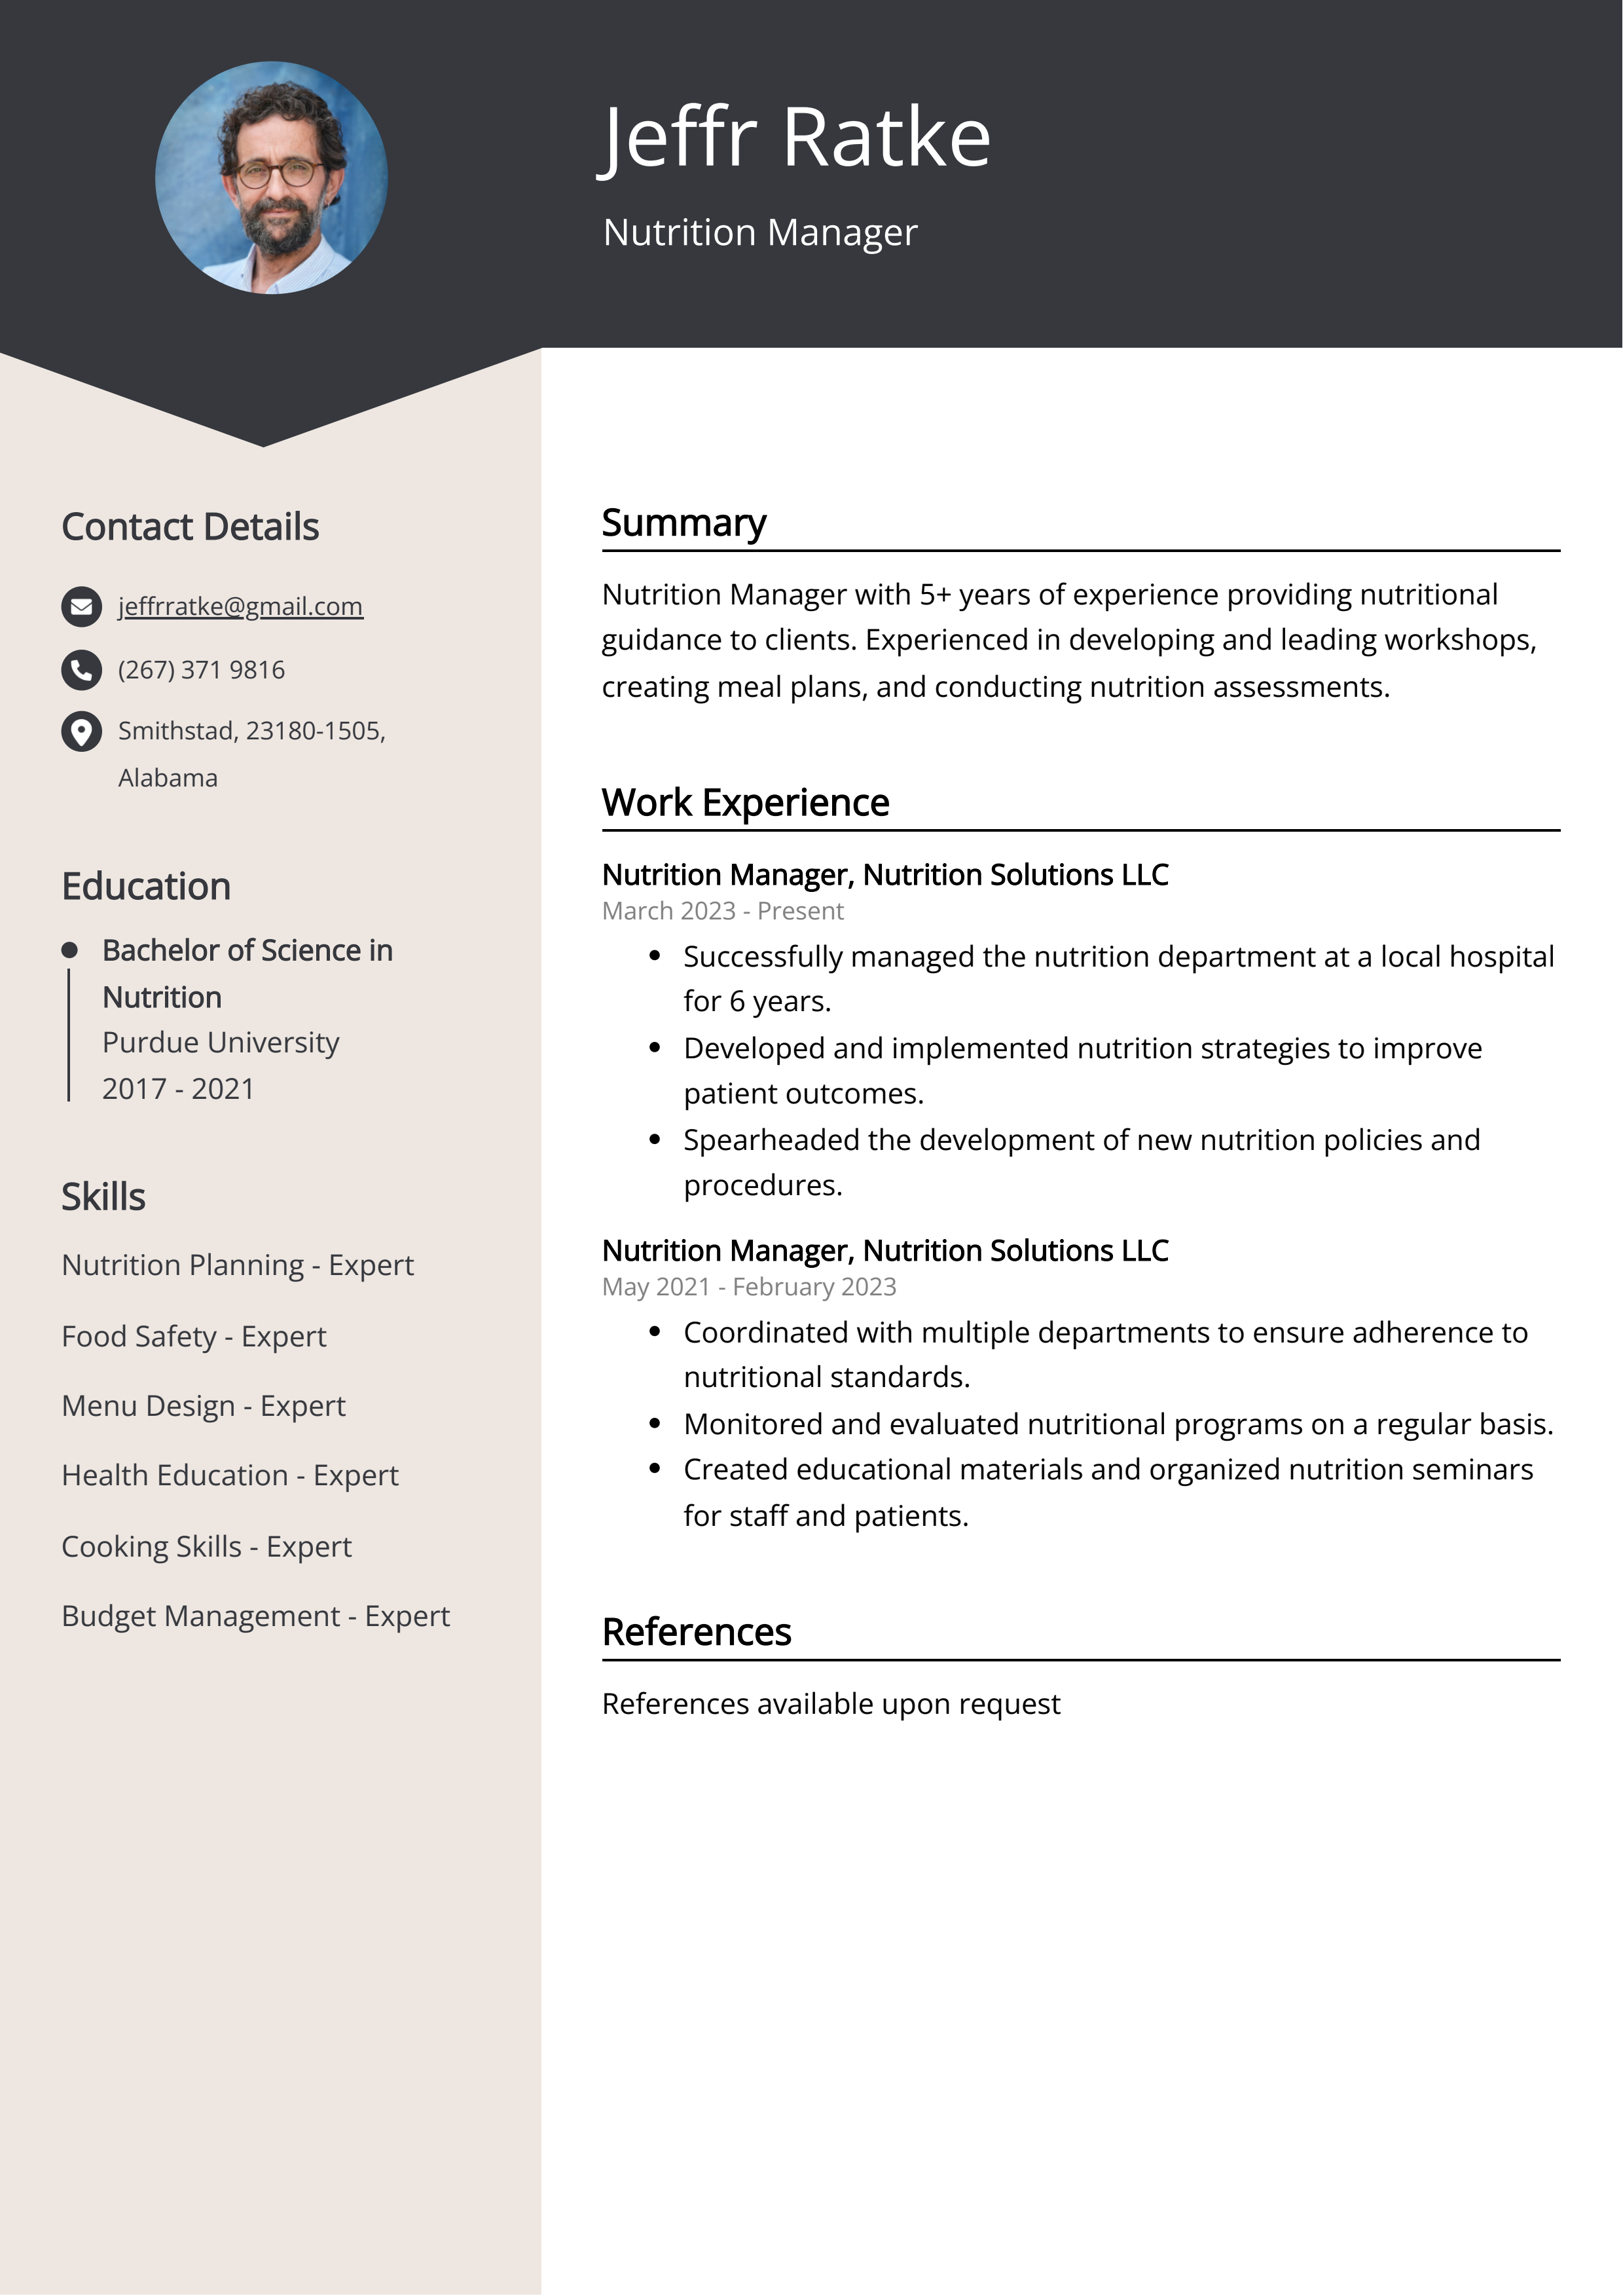 Nutrition Manager CV Example